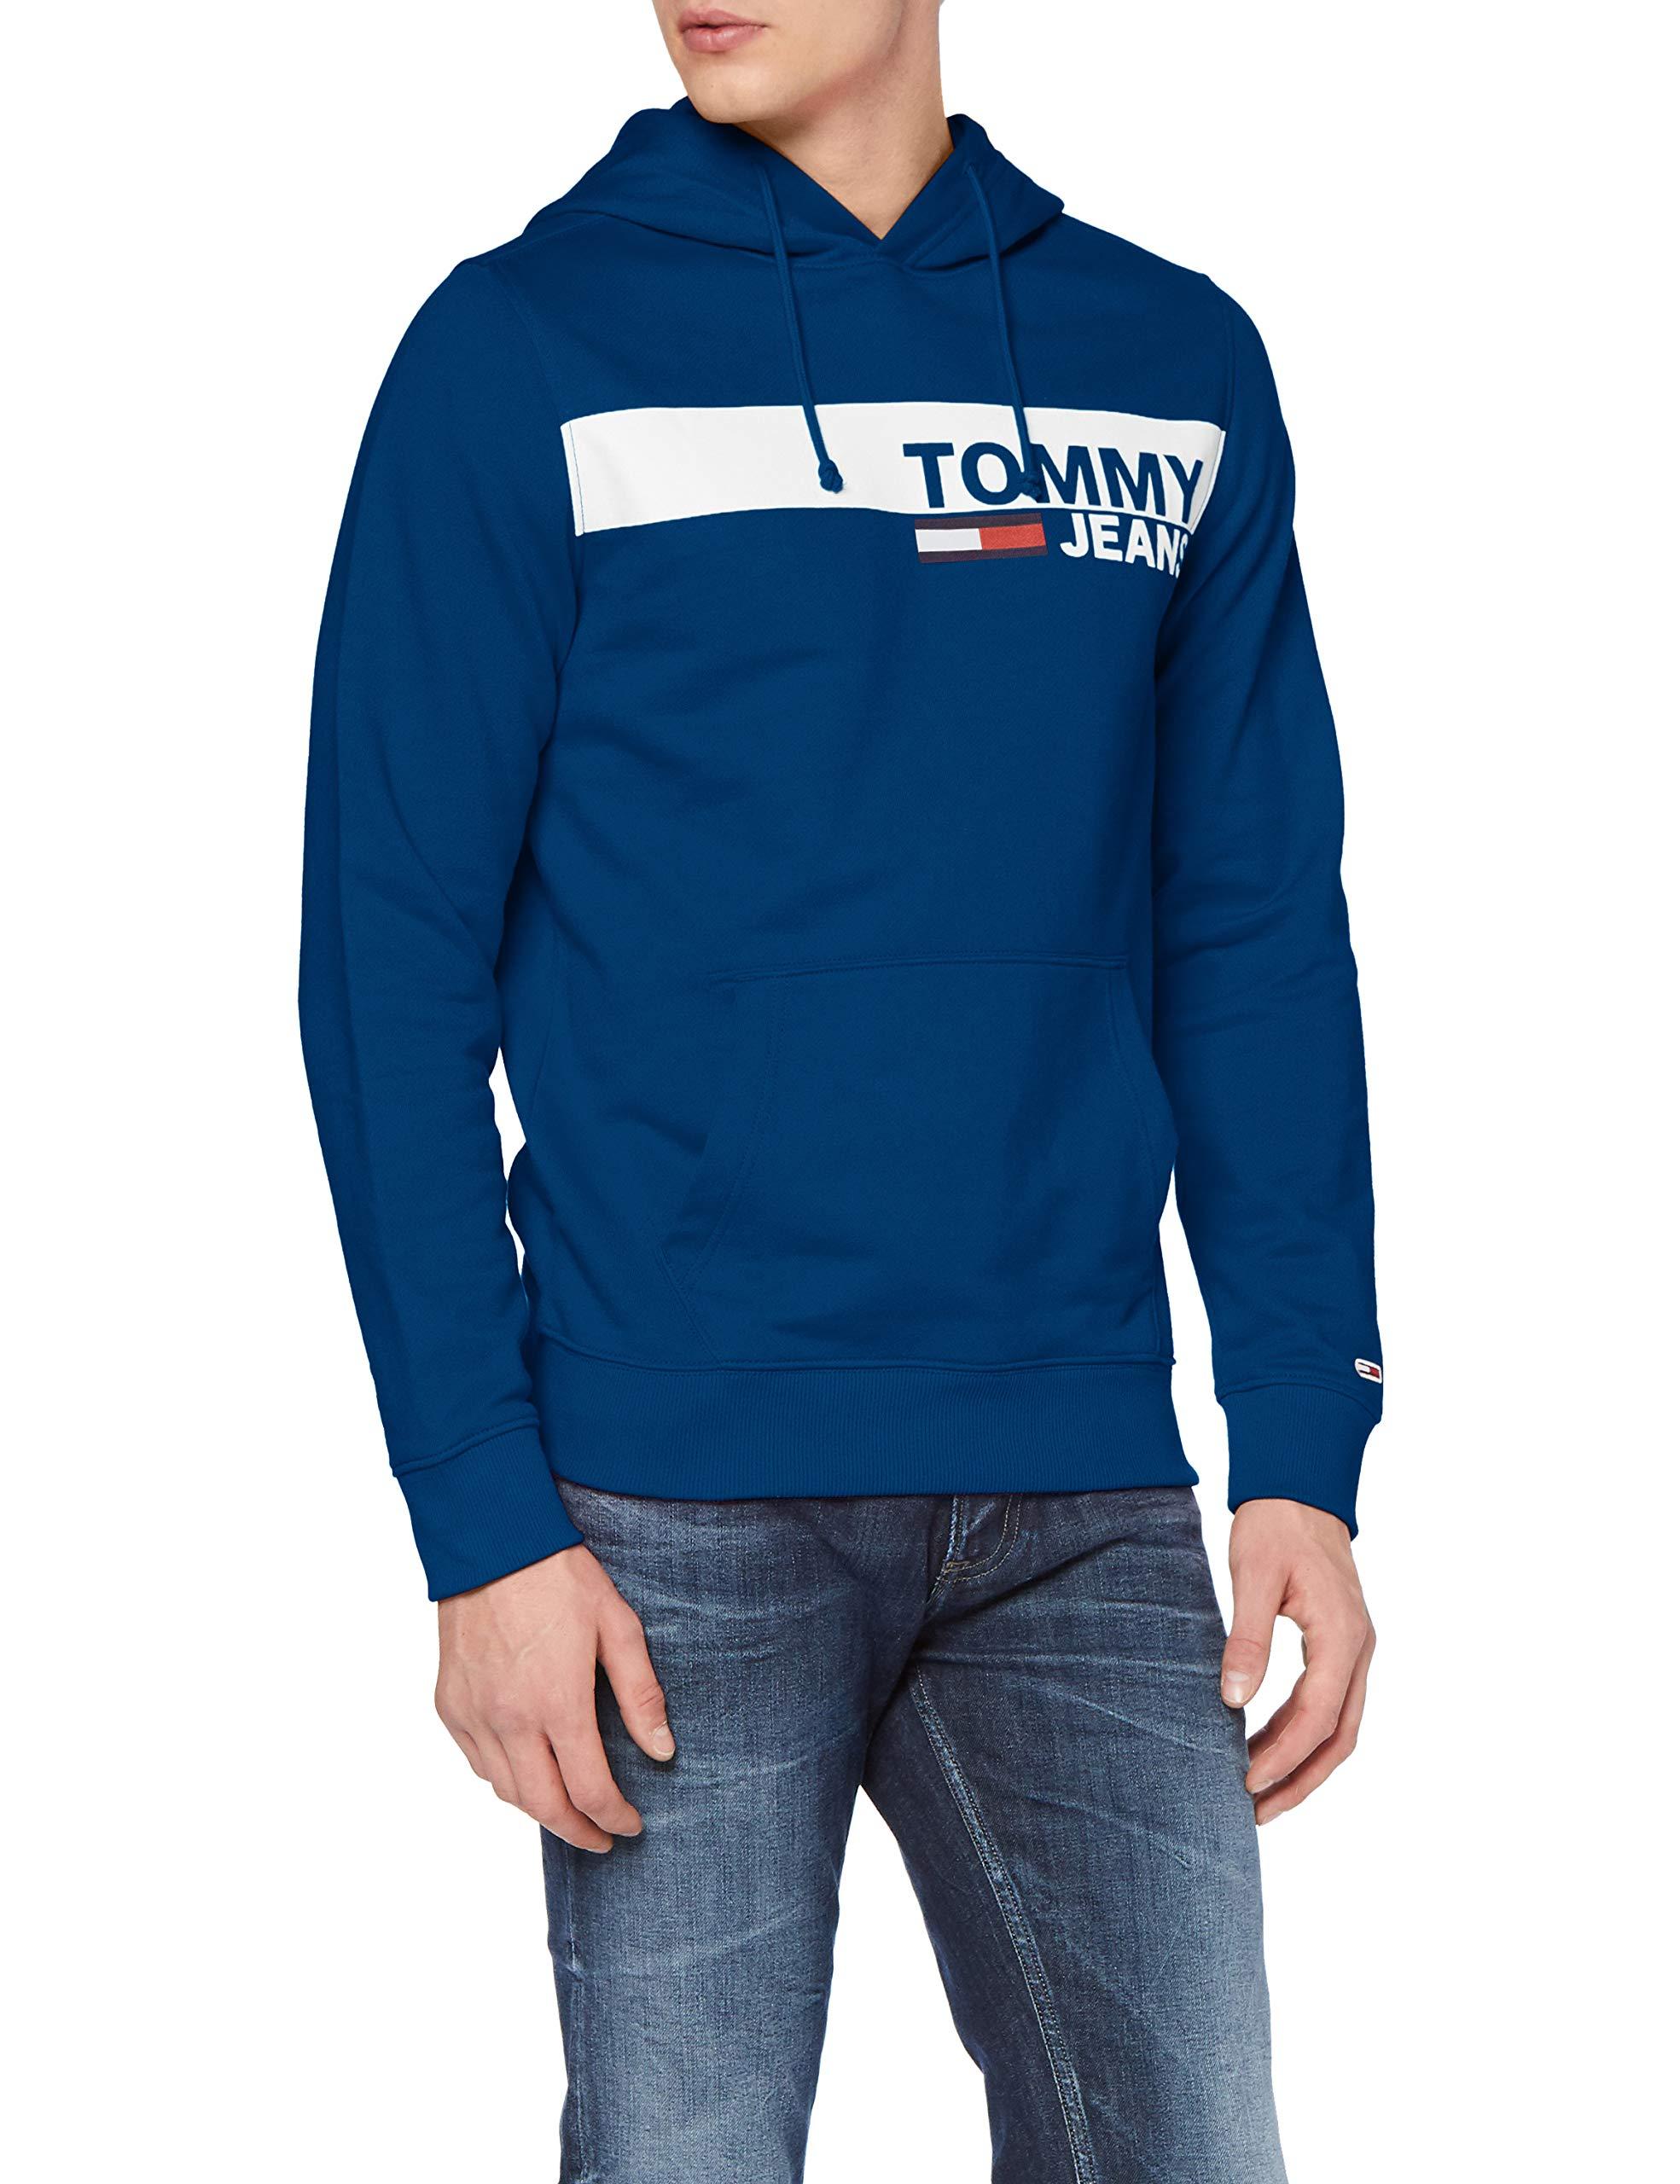 Tommy Hilfiger Fleece Essential Graphic Hoodie in Blue for Men - Lyst